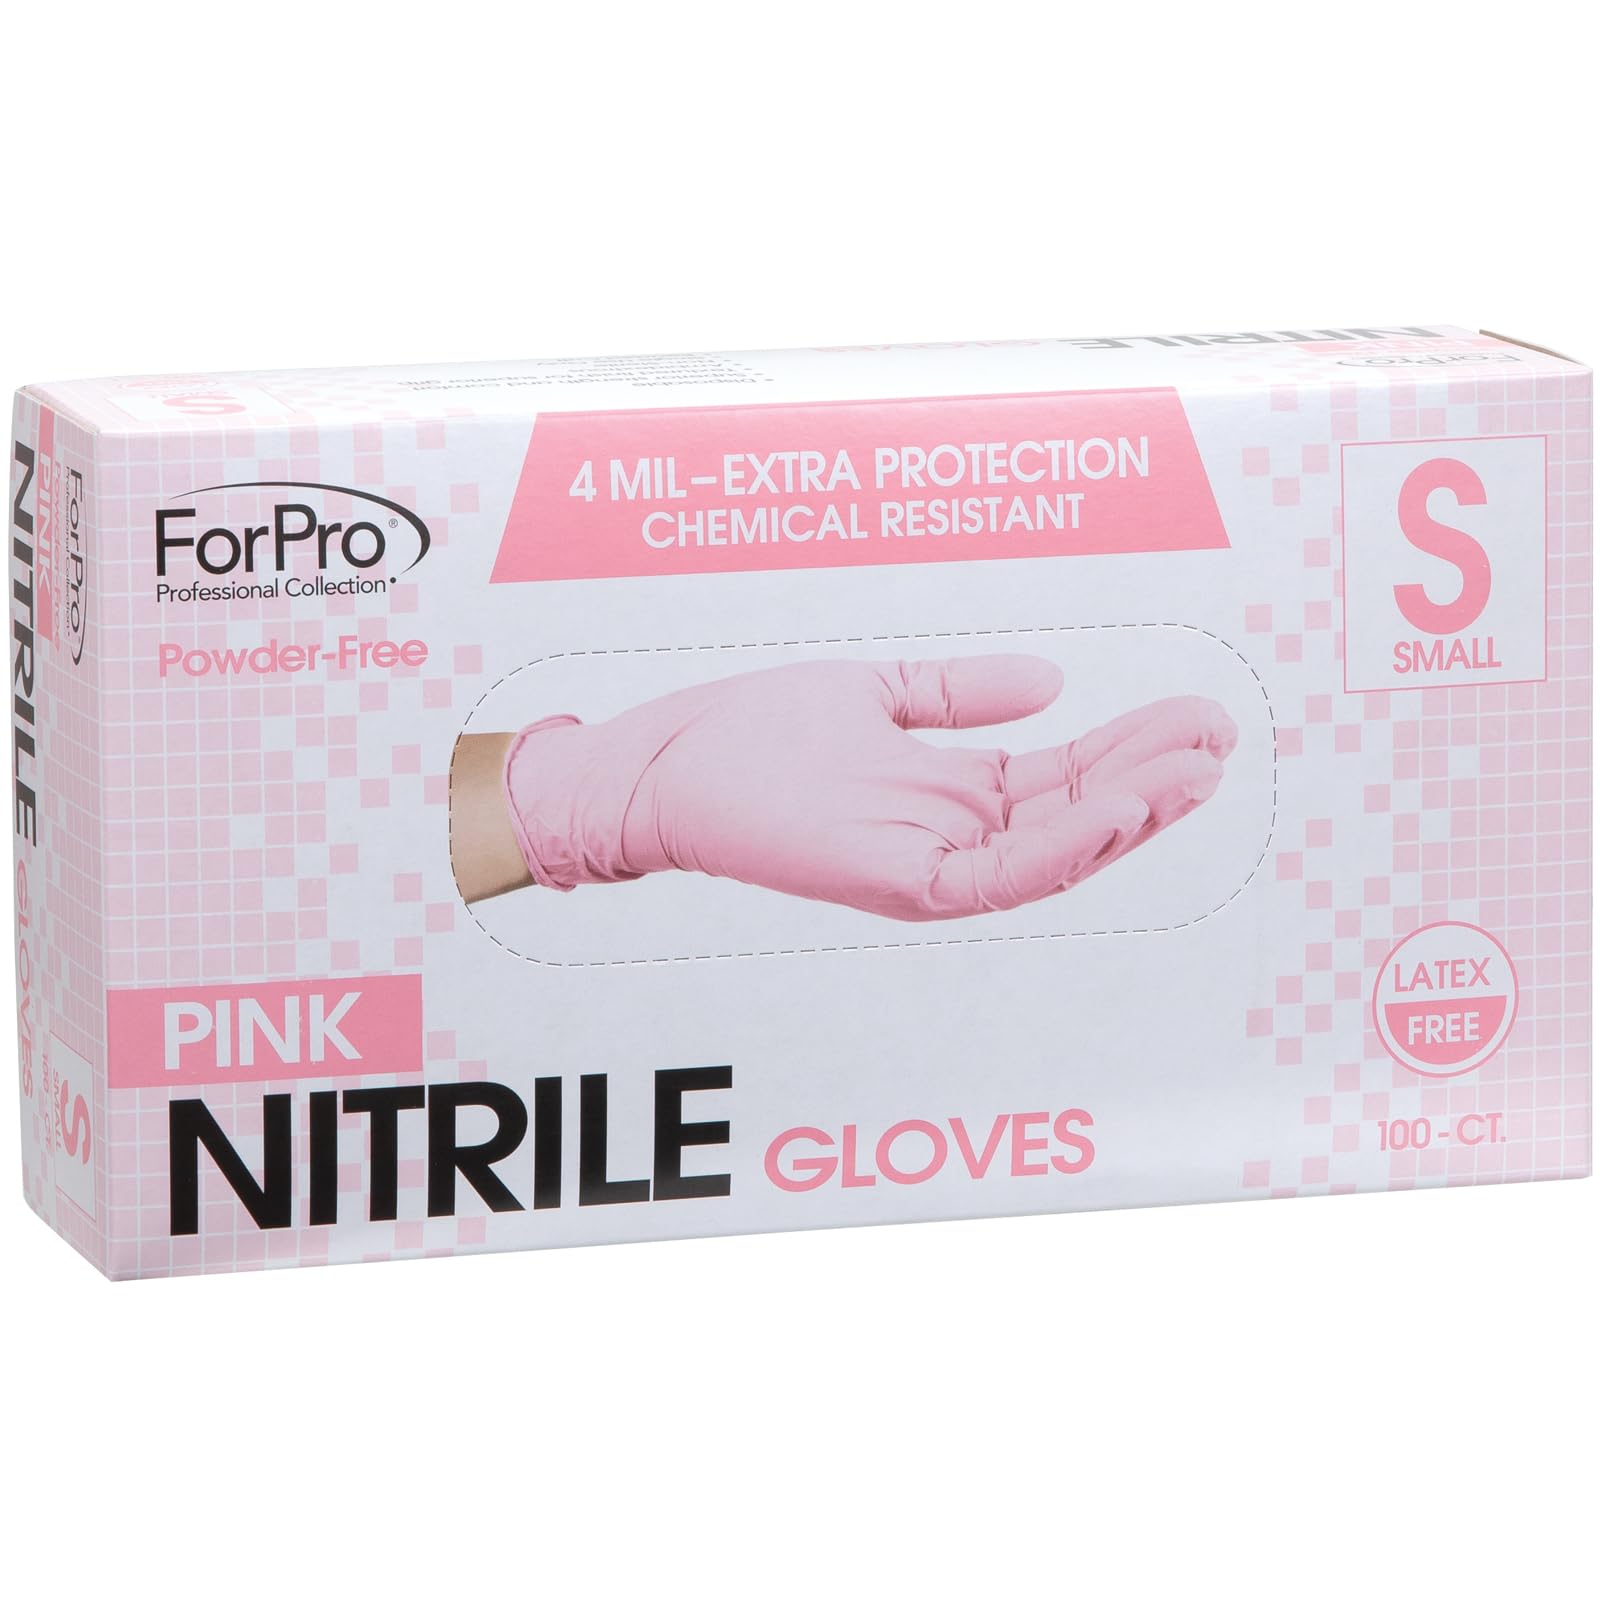 ForPro Disposable Nitrile Gloves, Chemical Resistant, Powder-Free, Latex-Free, Non-Sterile, Food Safe, 4 Mil, Pink, Small, 100-Count